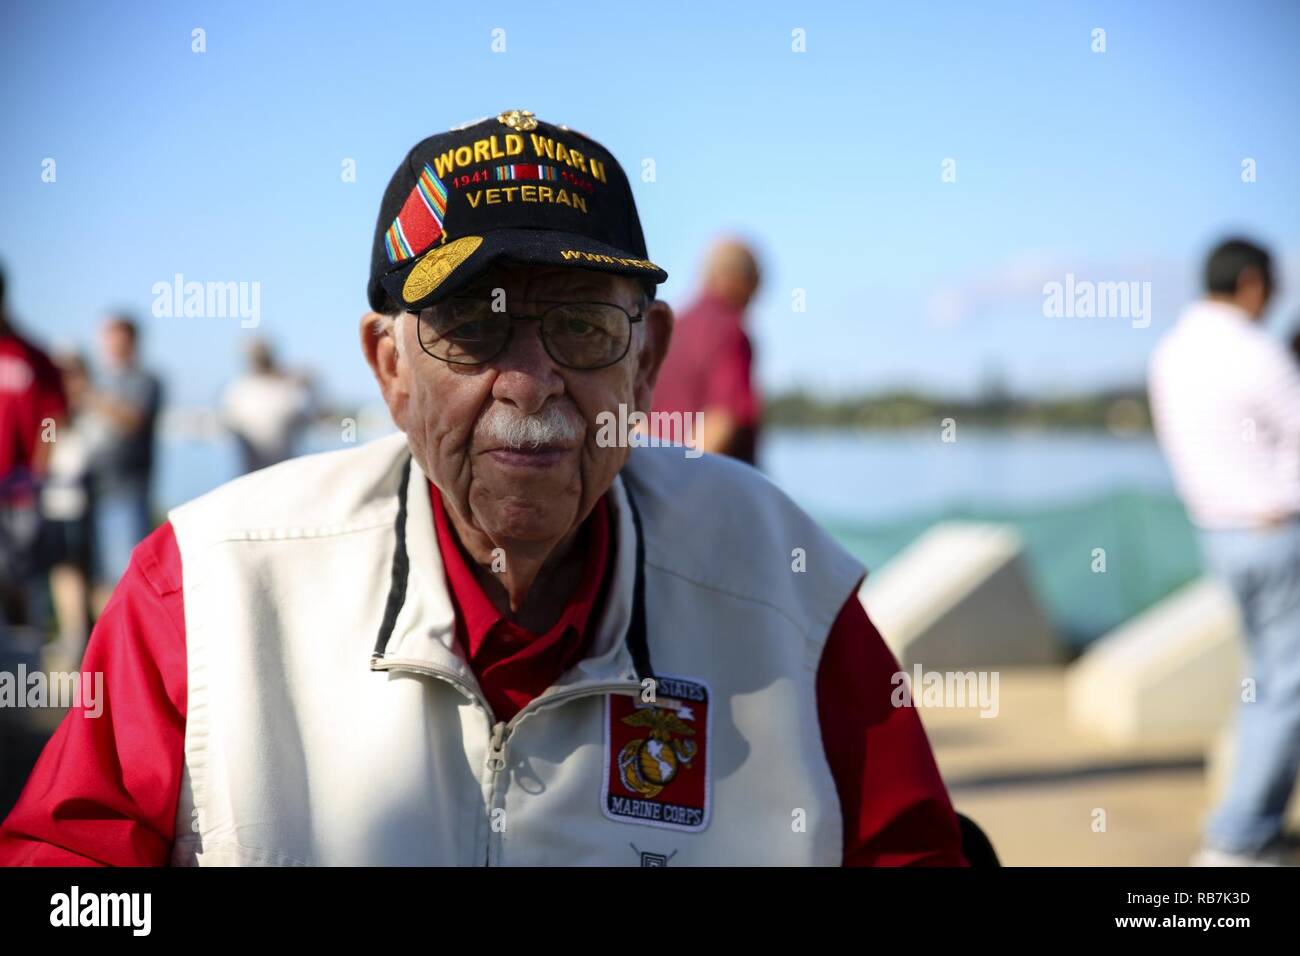 Former U.S. Marine Cpl. Arthur Smith visits the Waterfront Memorial during the Freedom Bell Opening Ceremony and Bell Ringing at USS Bowfin Submarine Museum & Park on Pearl Harbor, Hawaii, Dec. 6, 2016. Smith participated in the invasion of Guam with the 1st Provisional Marine Brigade. Civilians, veterans, and service members came together to remember and pay their respects to those who fought and lost their lives during the attack on Pearl Harbor. Stock Photo